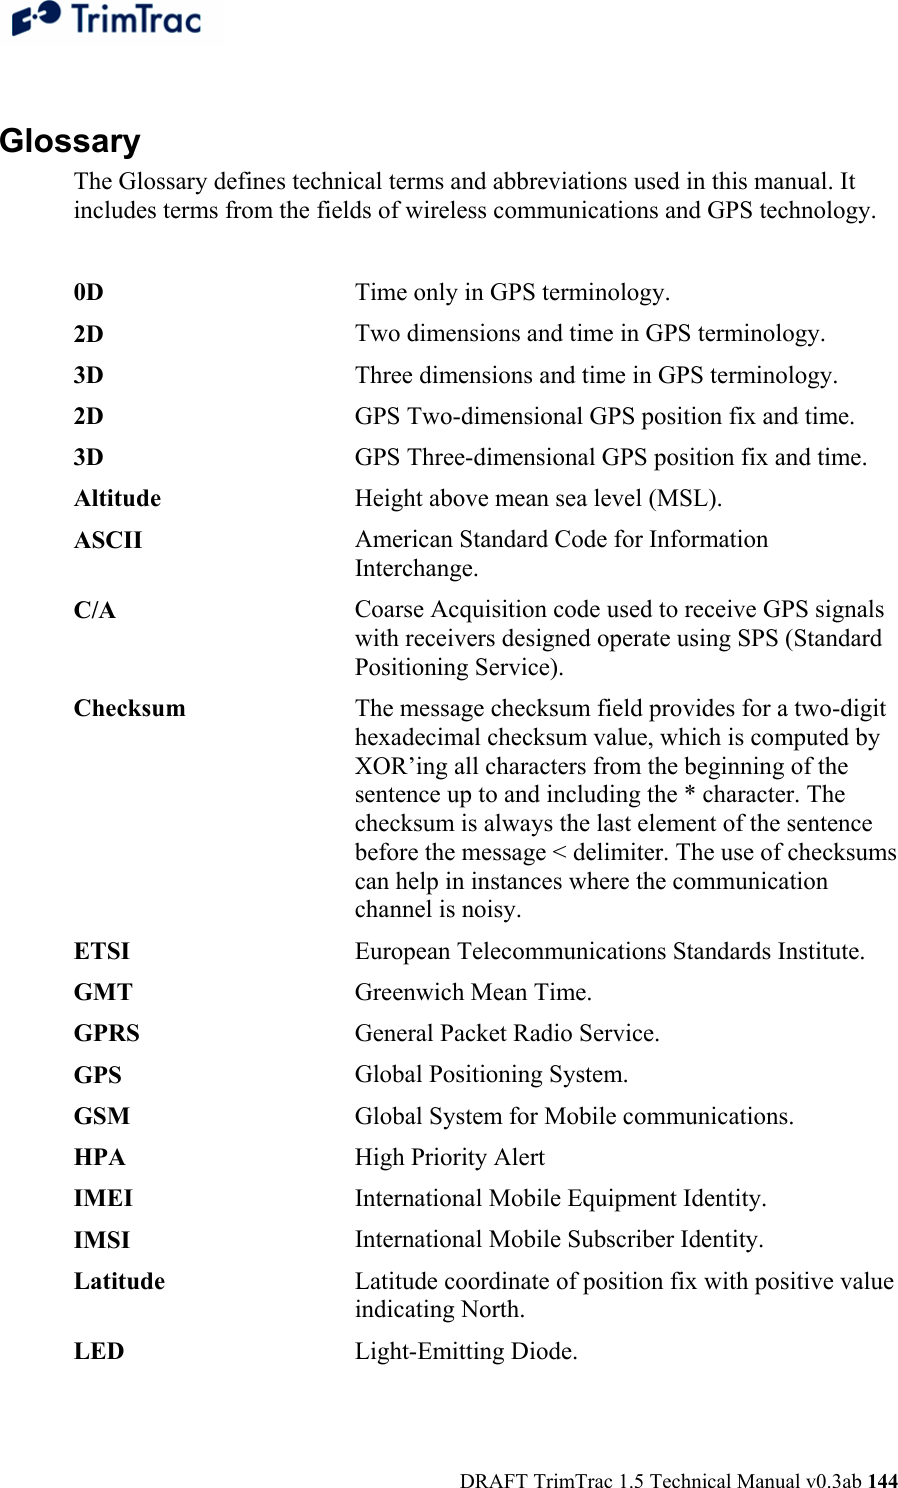  DRAFT TrimTrac 1.5 Technical Manual v0.3ab 144  Glossary The Glossary defines technical terms and abbreviations used in this manual. It includes terms from the fields of wireless communications and GPS technology.  0D   Time only in GPS terminology.2D   Two dimensions and time in GPS terminology.3D   Three dimensions and time in GPS terminology.2D   GPS Two-dimensional GPS position fix and time.3D  GPS Three-dimensional GPS position fix and time.Altitude  Height above mean sea level (MSL).ASCII  American Standard Code for Information Interchange.C/A   Coarse Acquisition code used to receive GPS signals with receivers designed operate using SPS (Standard Positioning Service).Checksum  The message checksum field provides for a two-digit hexadecimal checksum value, which is computed by XOR’ing all characters from the beginning of the sentence up to and including the * character. The checksum is always the last element of the sentence before the message &lt; delimiter. The use of checksums can help in instances where the communication channel is noisy.ETSI   European Telecommunications Standards Institute. GMT  Greenwich Mean Time. GPRS   General Packet Radio Service.GPS  Global Positioning System.GSM  Global System for Mobile communications.HPA  High Priority AlertIMEI  International Mobile Equipment Identity.IMSI  International Mobile Subscriber Identity.Latitude  Latitude coordinate of position fix with positive value indicating North.LED  Light-Emitting Diode.